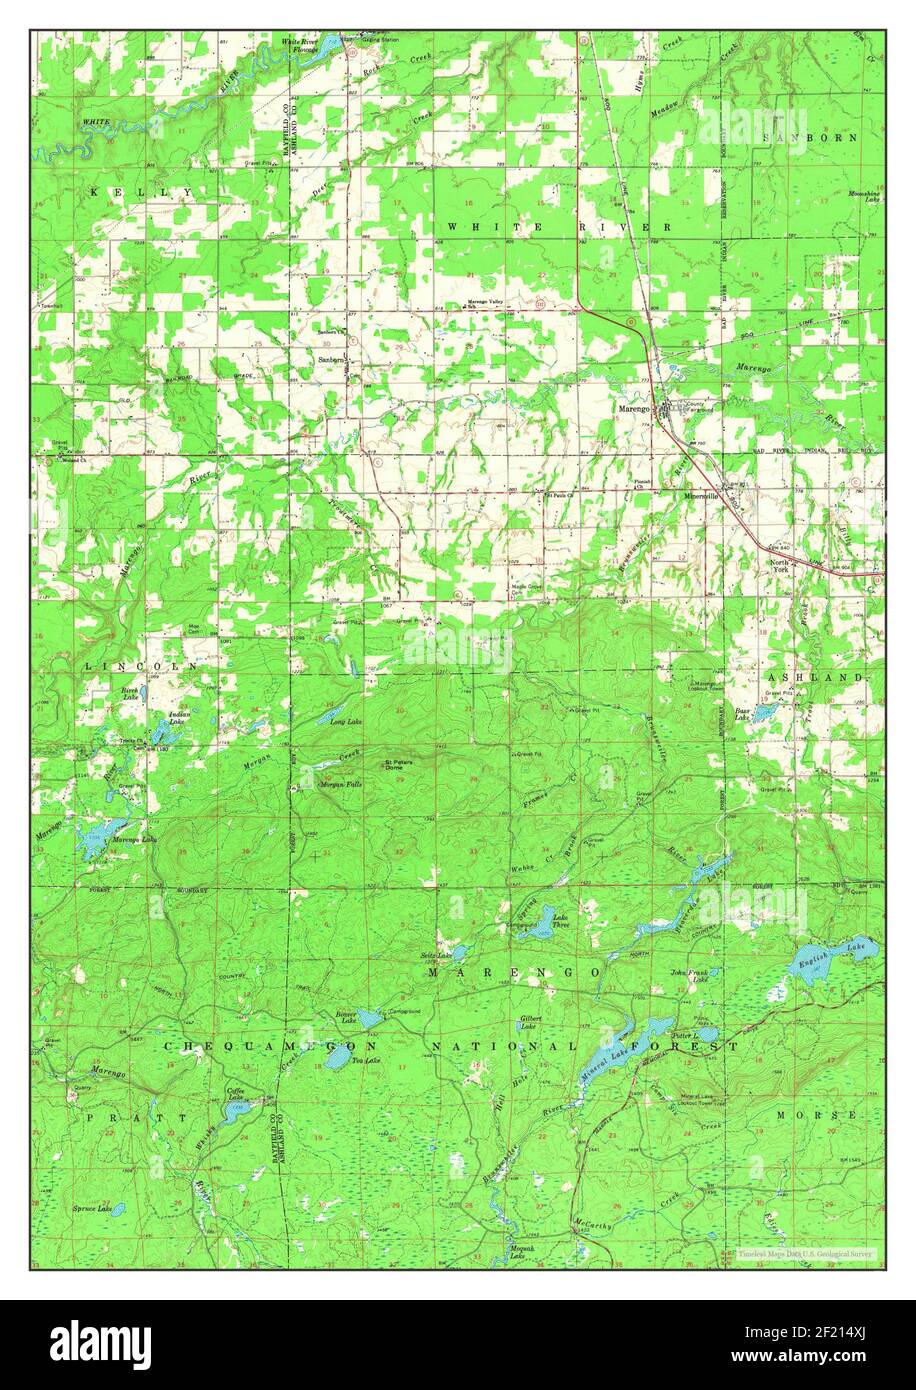 Marengo, Wisconsin, map 1967, 1:62500, United States of America by Timeless Maps, data U.S. Geological Survey Stock Photo